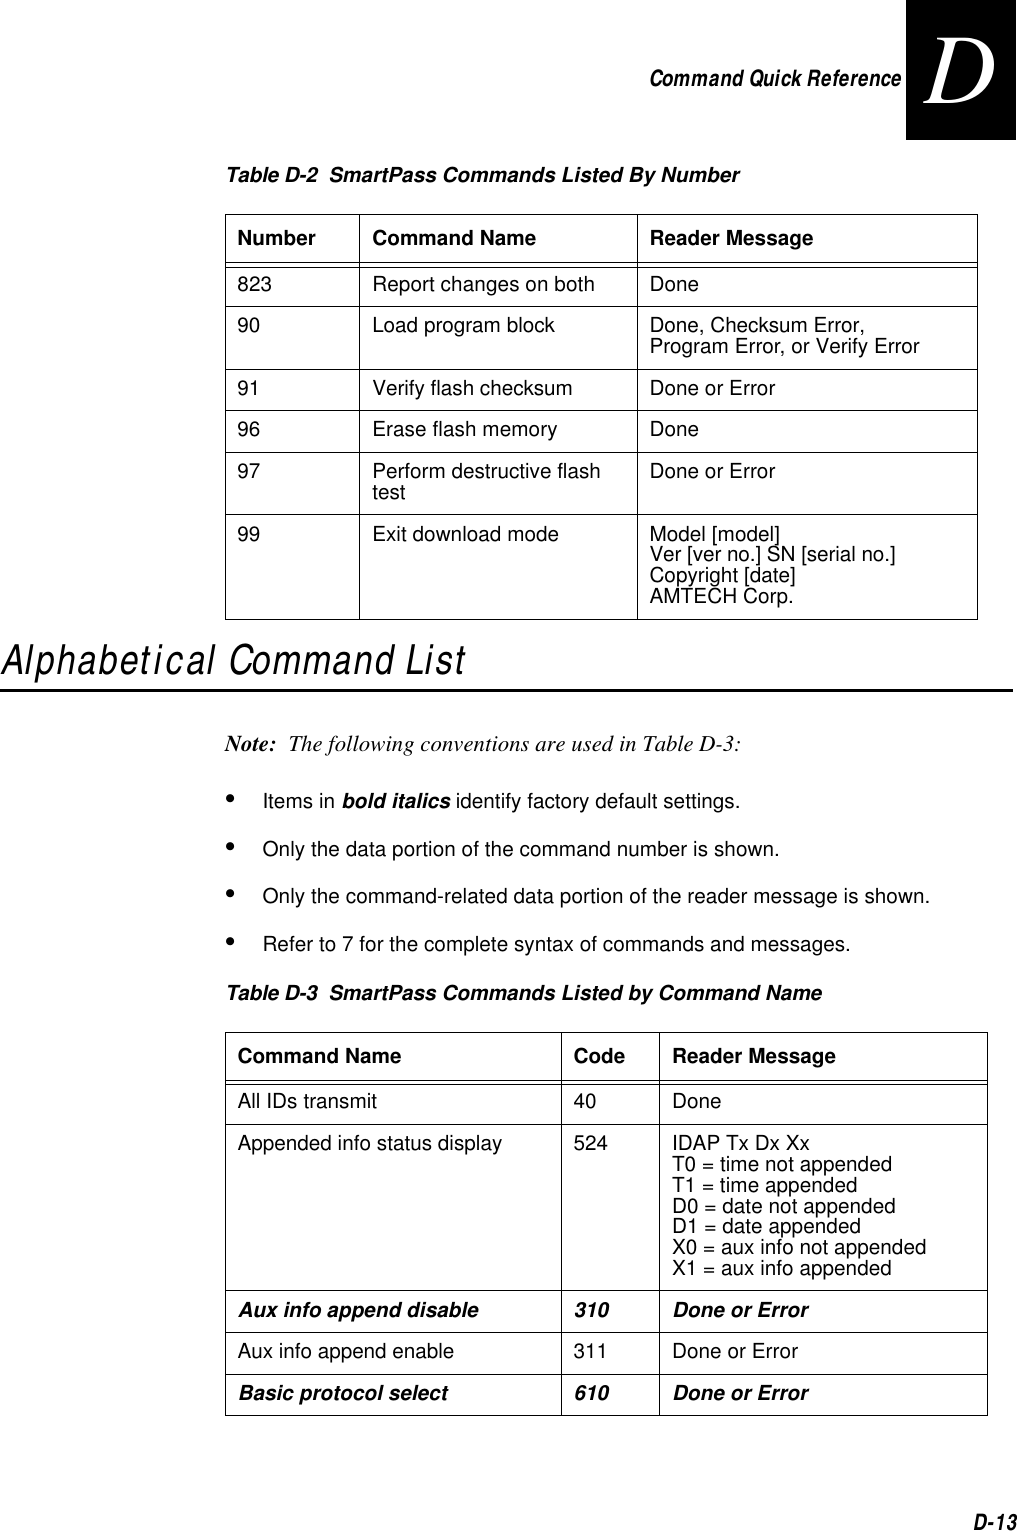 Command Quick ReferenceD-13DAlphabetical Command ListNote:  The following conventions are used in Table D-3: •Items in bold italics identify factory default settings.•Only the data portion of the command number is shown. •Only the command-related data portion of the reader message is shown.•Refer to 7 for the complete syntax of commands and messages.823 Report changes on both Done90 Load program block Done, Checksum Error, Program Error, or Verify Error91 Verify flash checksum Done or Error96 Erase flash memory Done97 Perform destructive flash test Done or Error99 Exit download mode Model [model] Ver [ver no.] SN [serial no.]Copyright [date]AMTECH Corp.Table D-2  SmartPass Commands Listed By NumberNumber Command Name Reader MessageTable D-3  SmartPass Commands Listed by Command NameCommand Name Code Reader MessageAll IDs transmit 40 DoneAppended info status display 524 IDAP Tx Dx Xx T0 = time not appendedT1 = time appendedD0 = date not appendedD1 = date appendedX0 = aux info not appendedX1 = aux info appendedAux info append disable 310 Done or ErrorAux info append enable 311 Done or ErrorBasic protocol select 610 Done or Error